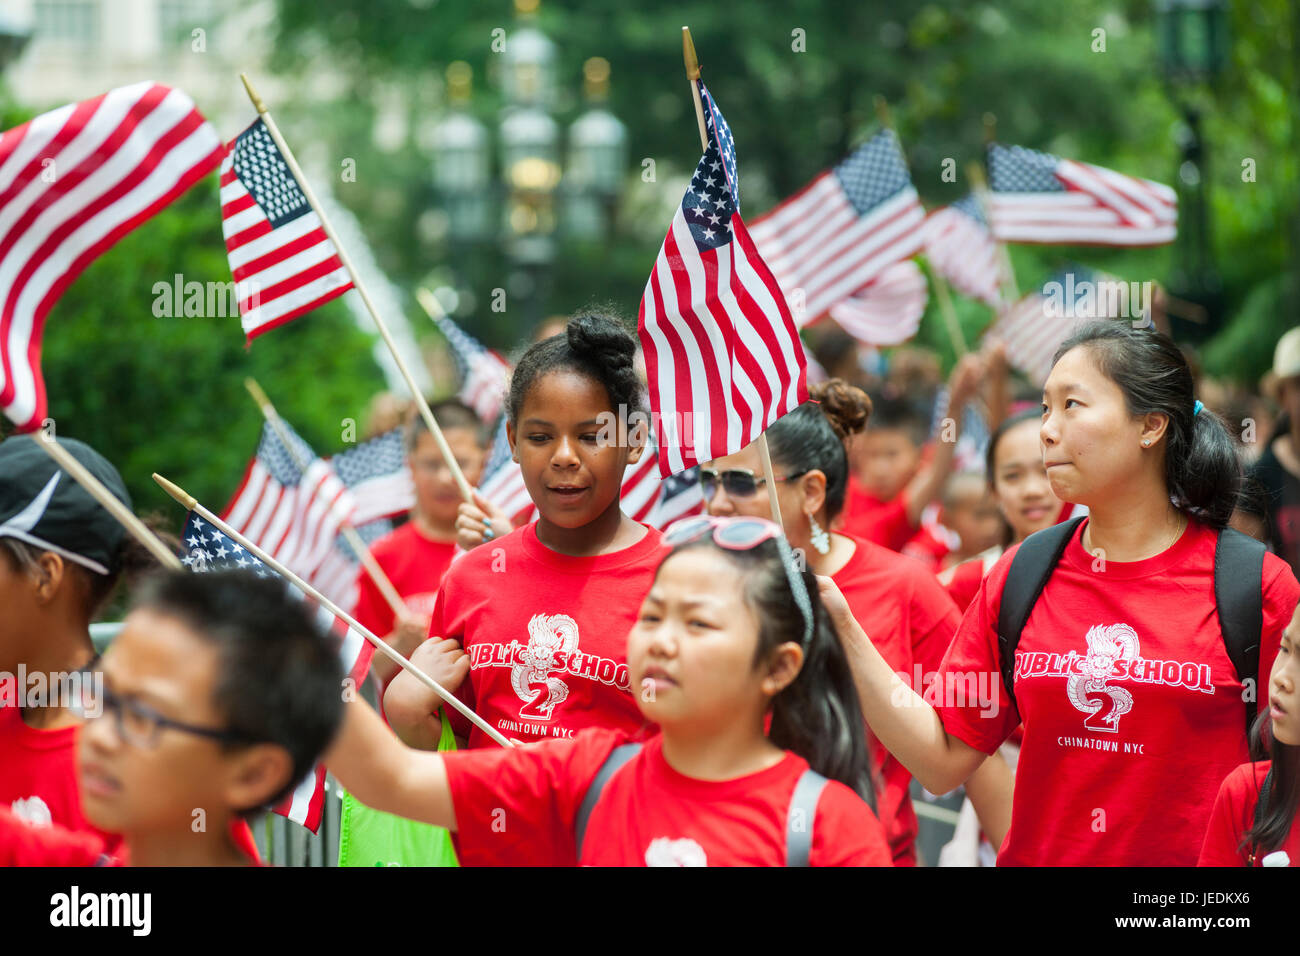 Students from PS 2 march in the annual Flag Day Parade in New York on Wednesday, June 14, 2017, starting at New York City Hall Park.  Flag Day was created by proclamation by President Woodrow Wilson on June 14, 1916 as a holiday honoring America's flag but it was not until 1949 when it became National Flag Day.  The holiday honors the 1777 Flag Resolution where the stars and stripes were officially adopted as the flag of the United States. (© Richard B. Levine) Stock Photo